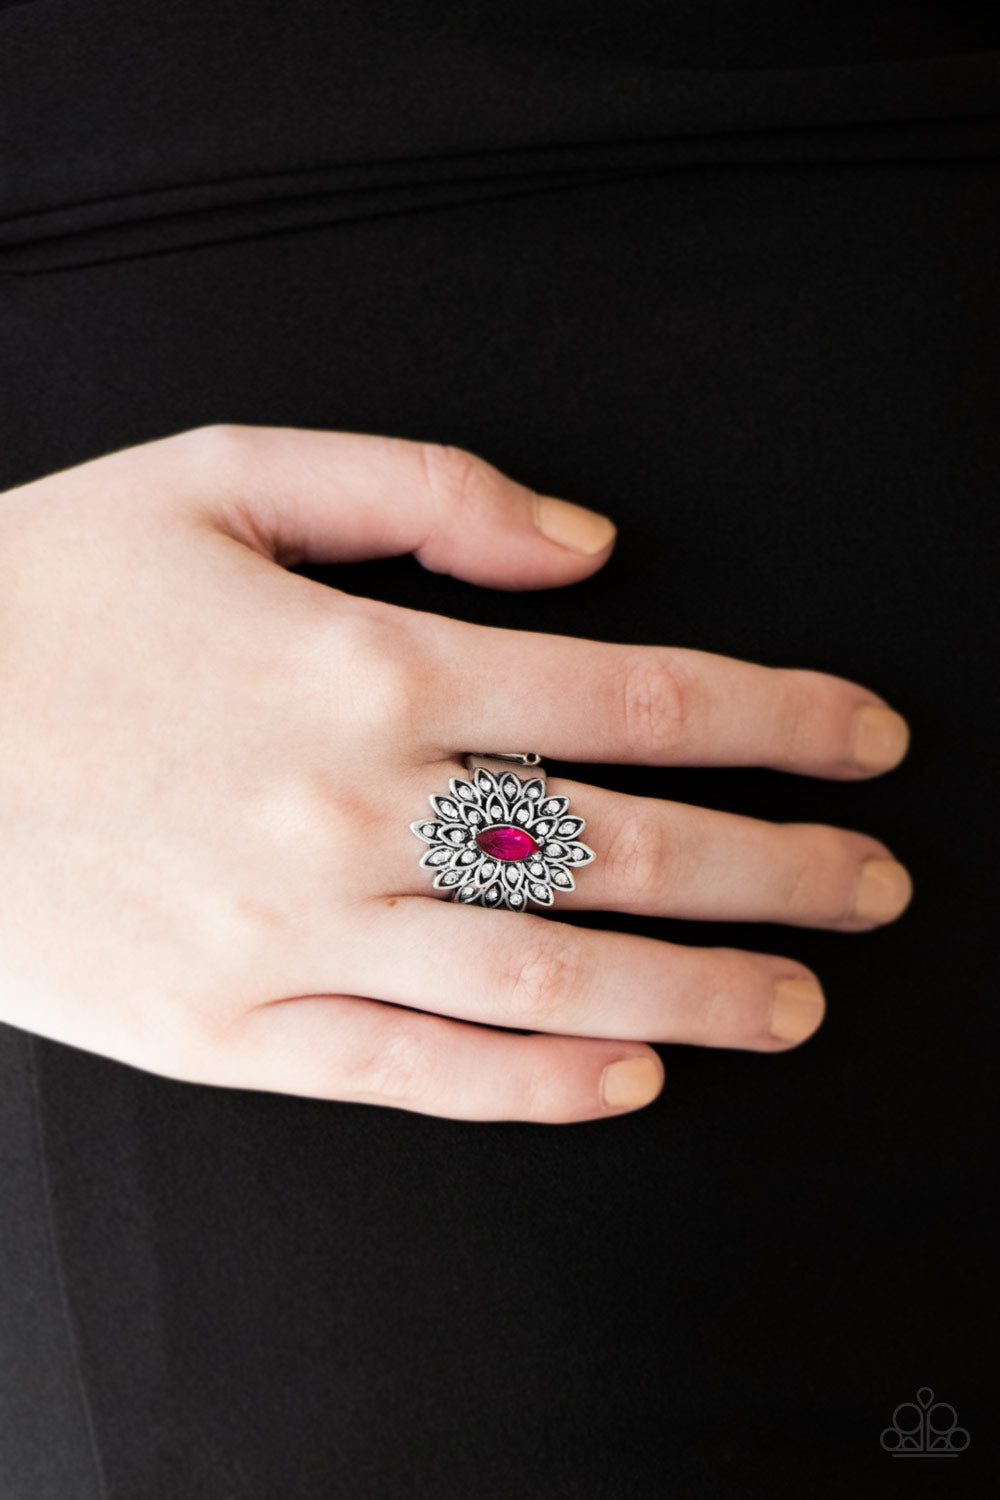 Paparazzi Accessories - Blooming Fireworks - Pink & Silver Ring